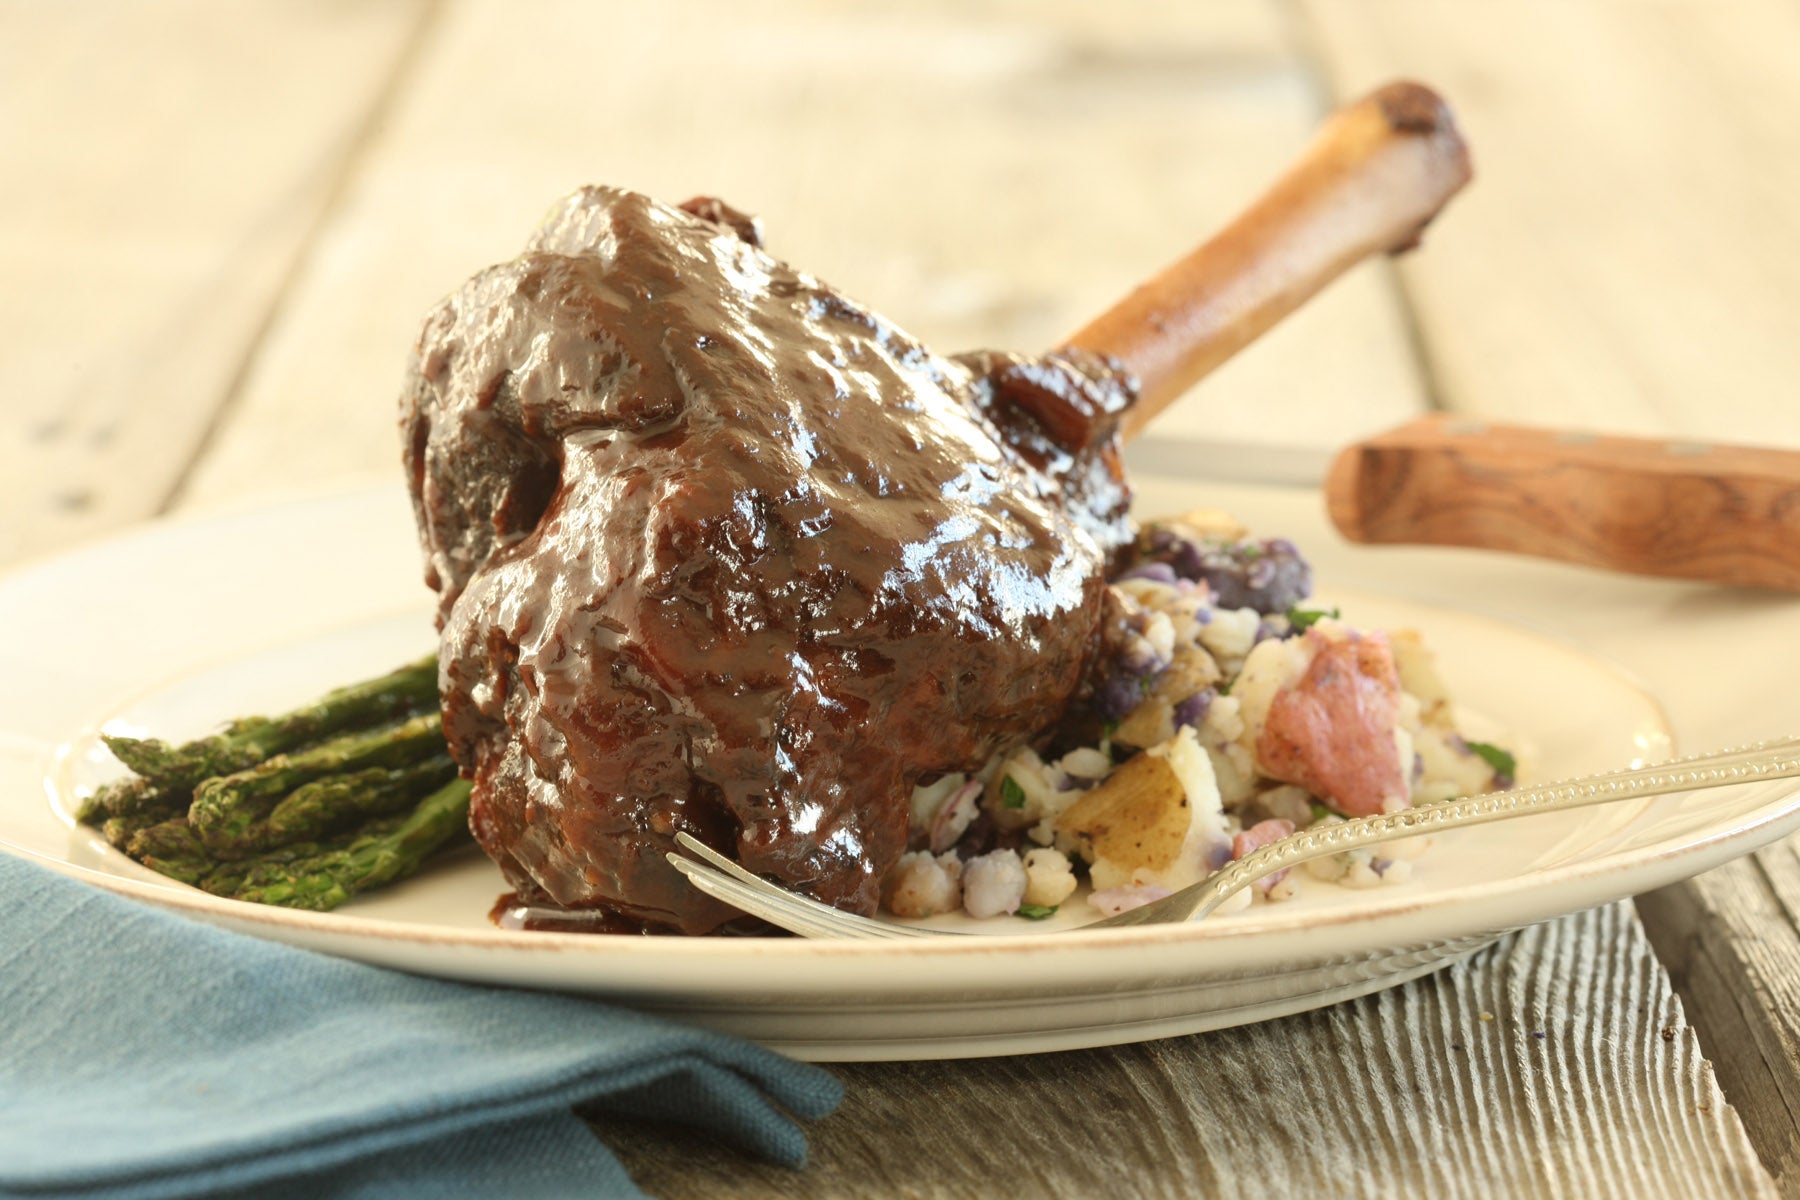 Braised American Lamb Shanks with Herb-smashed Baby Potatoes & Roasted Asparagus